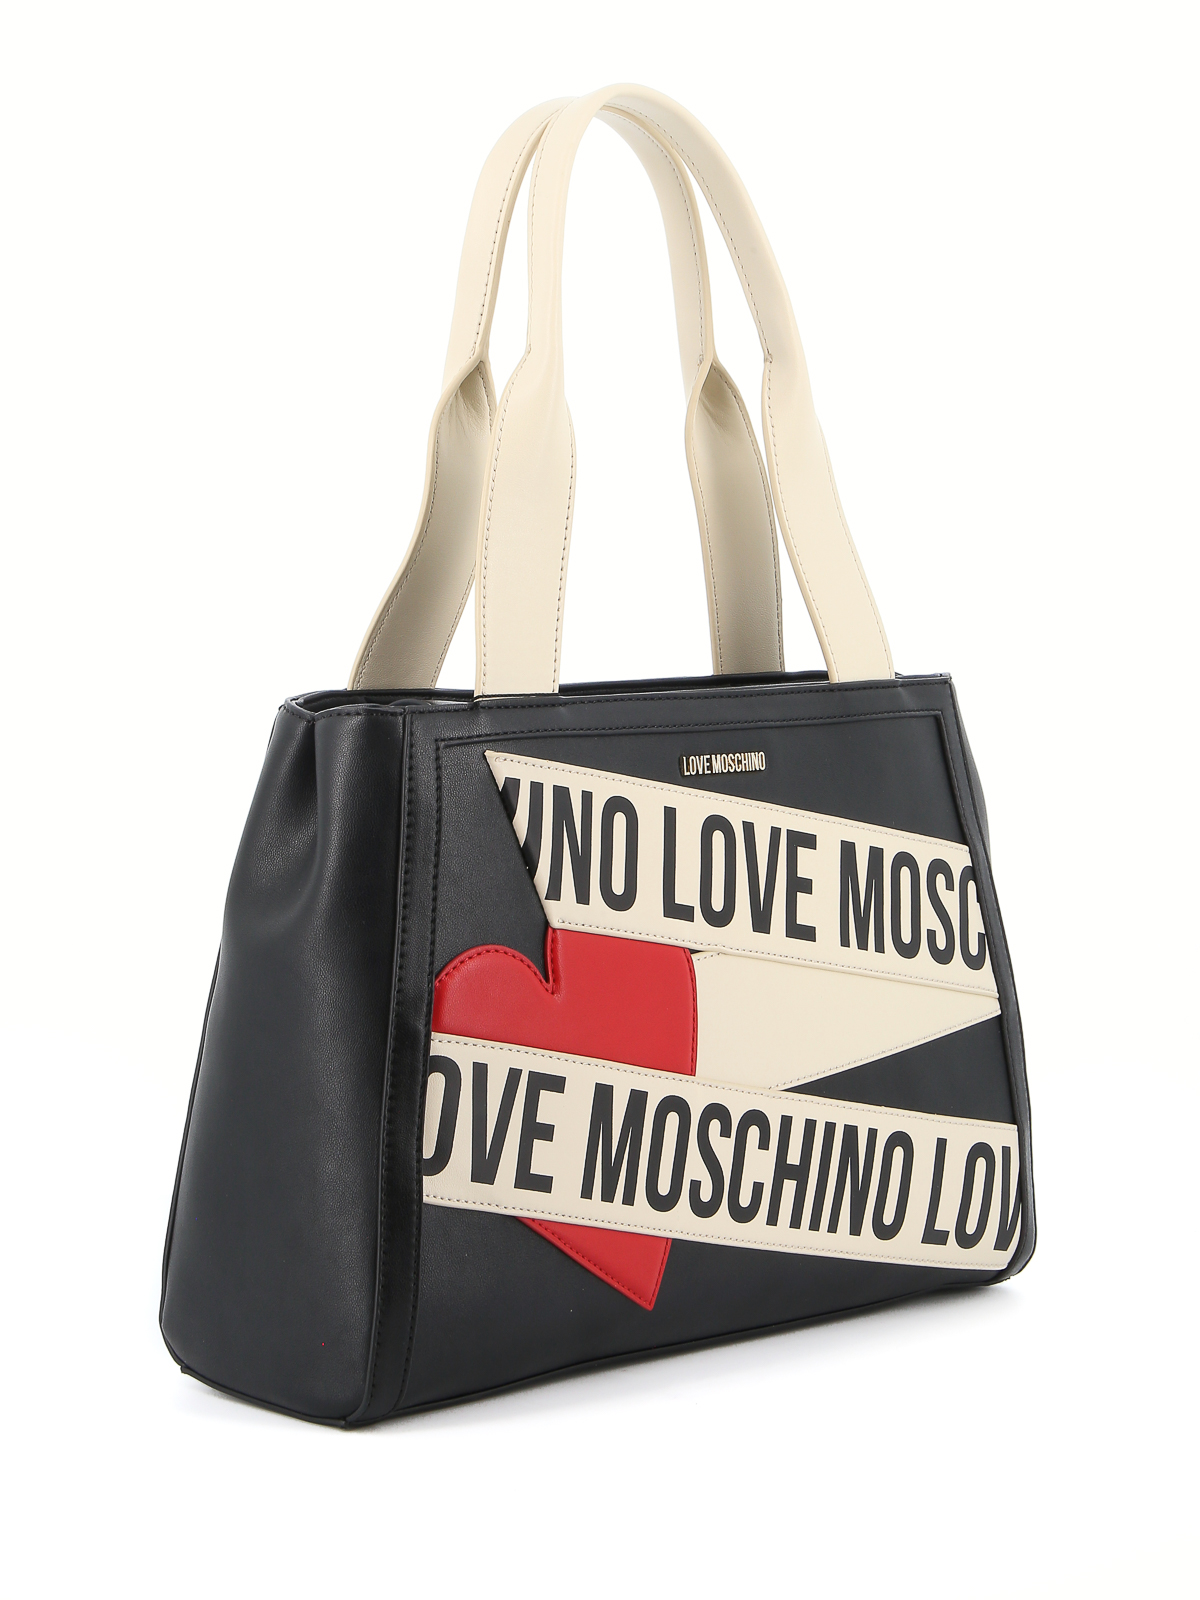 about love moschino